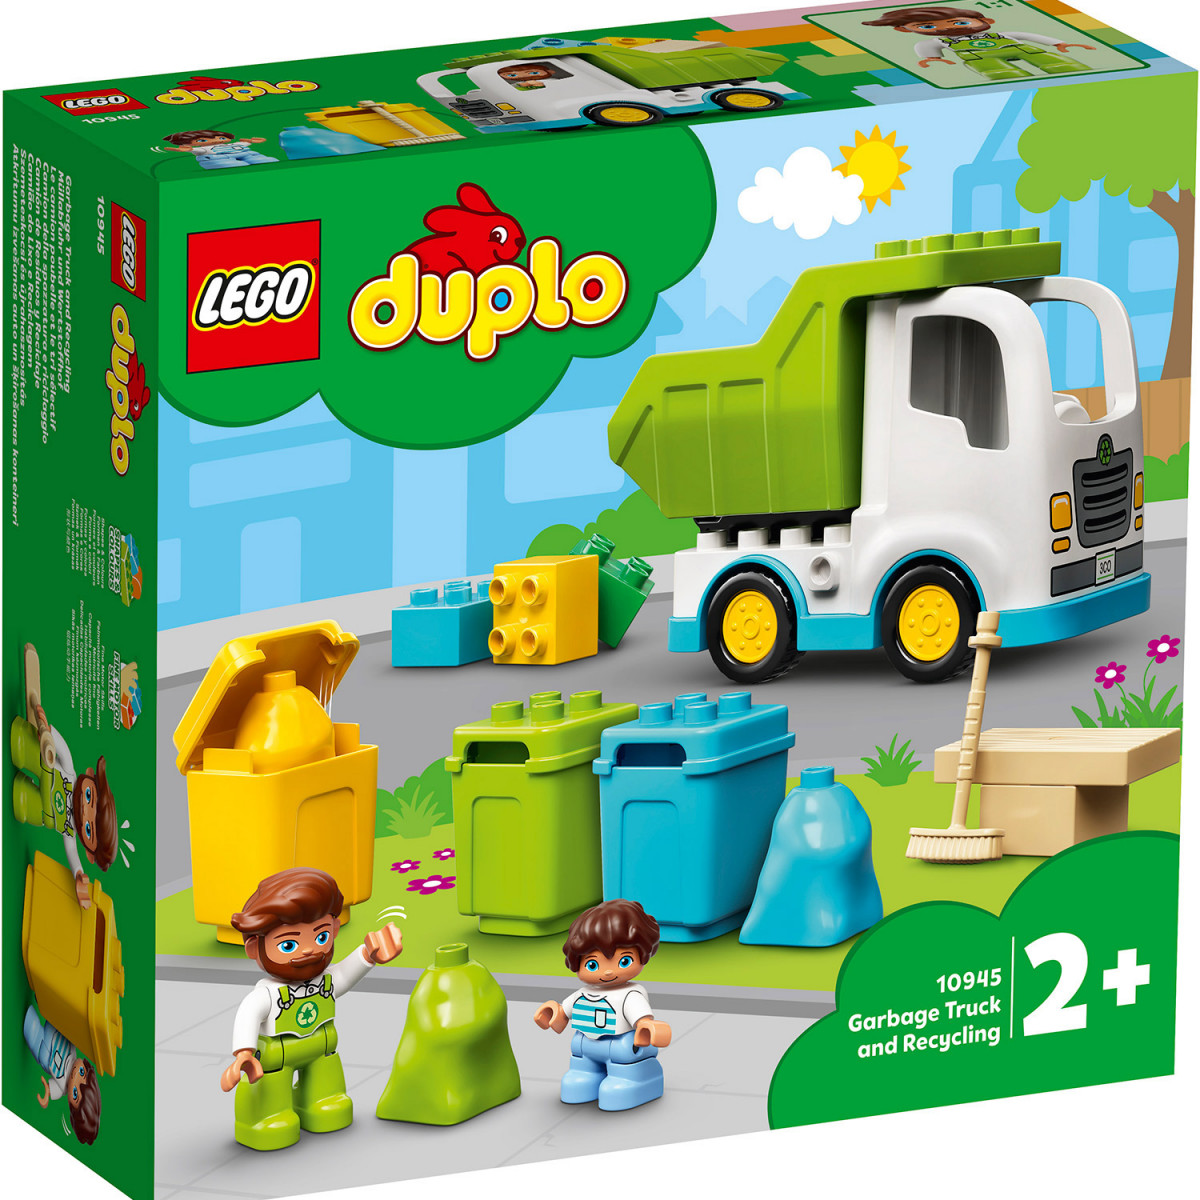 LEGO DUPLO TOWN GARBAGE TRUCK AND RECYCLING 